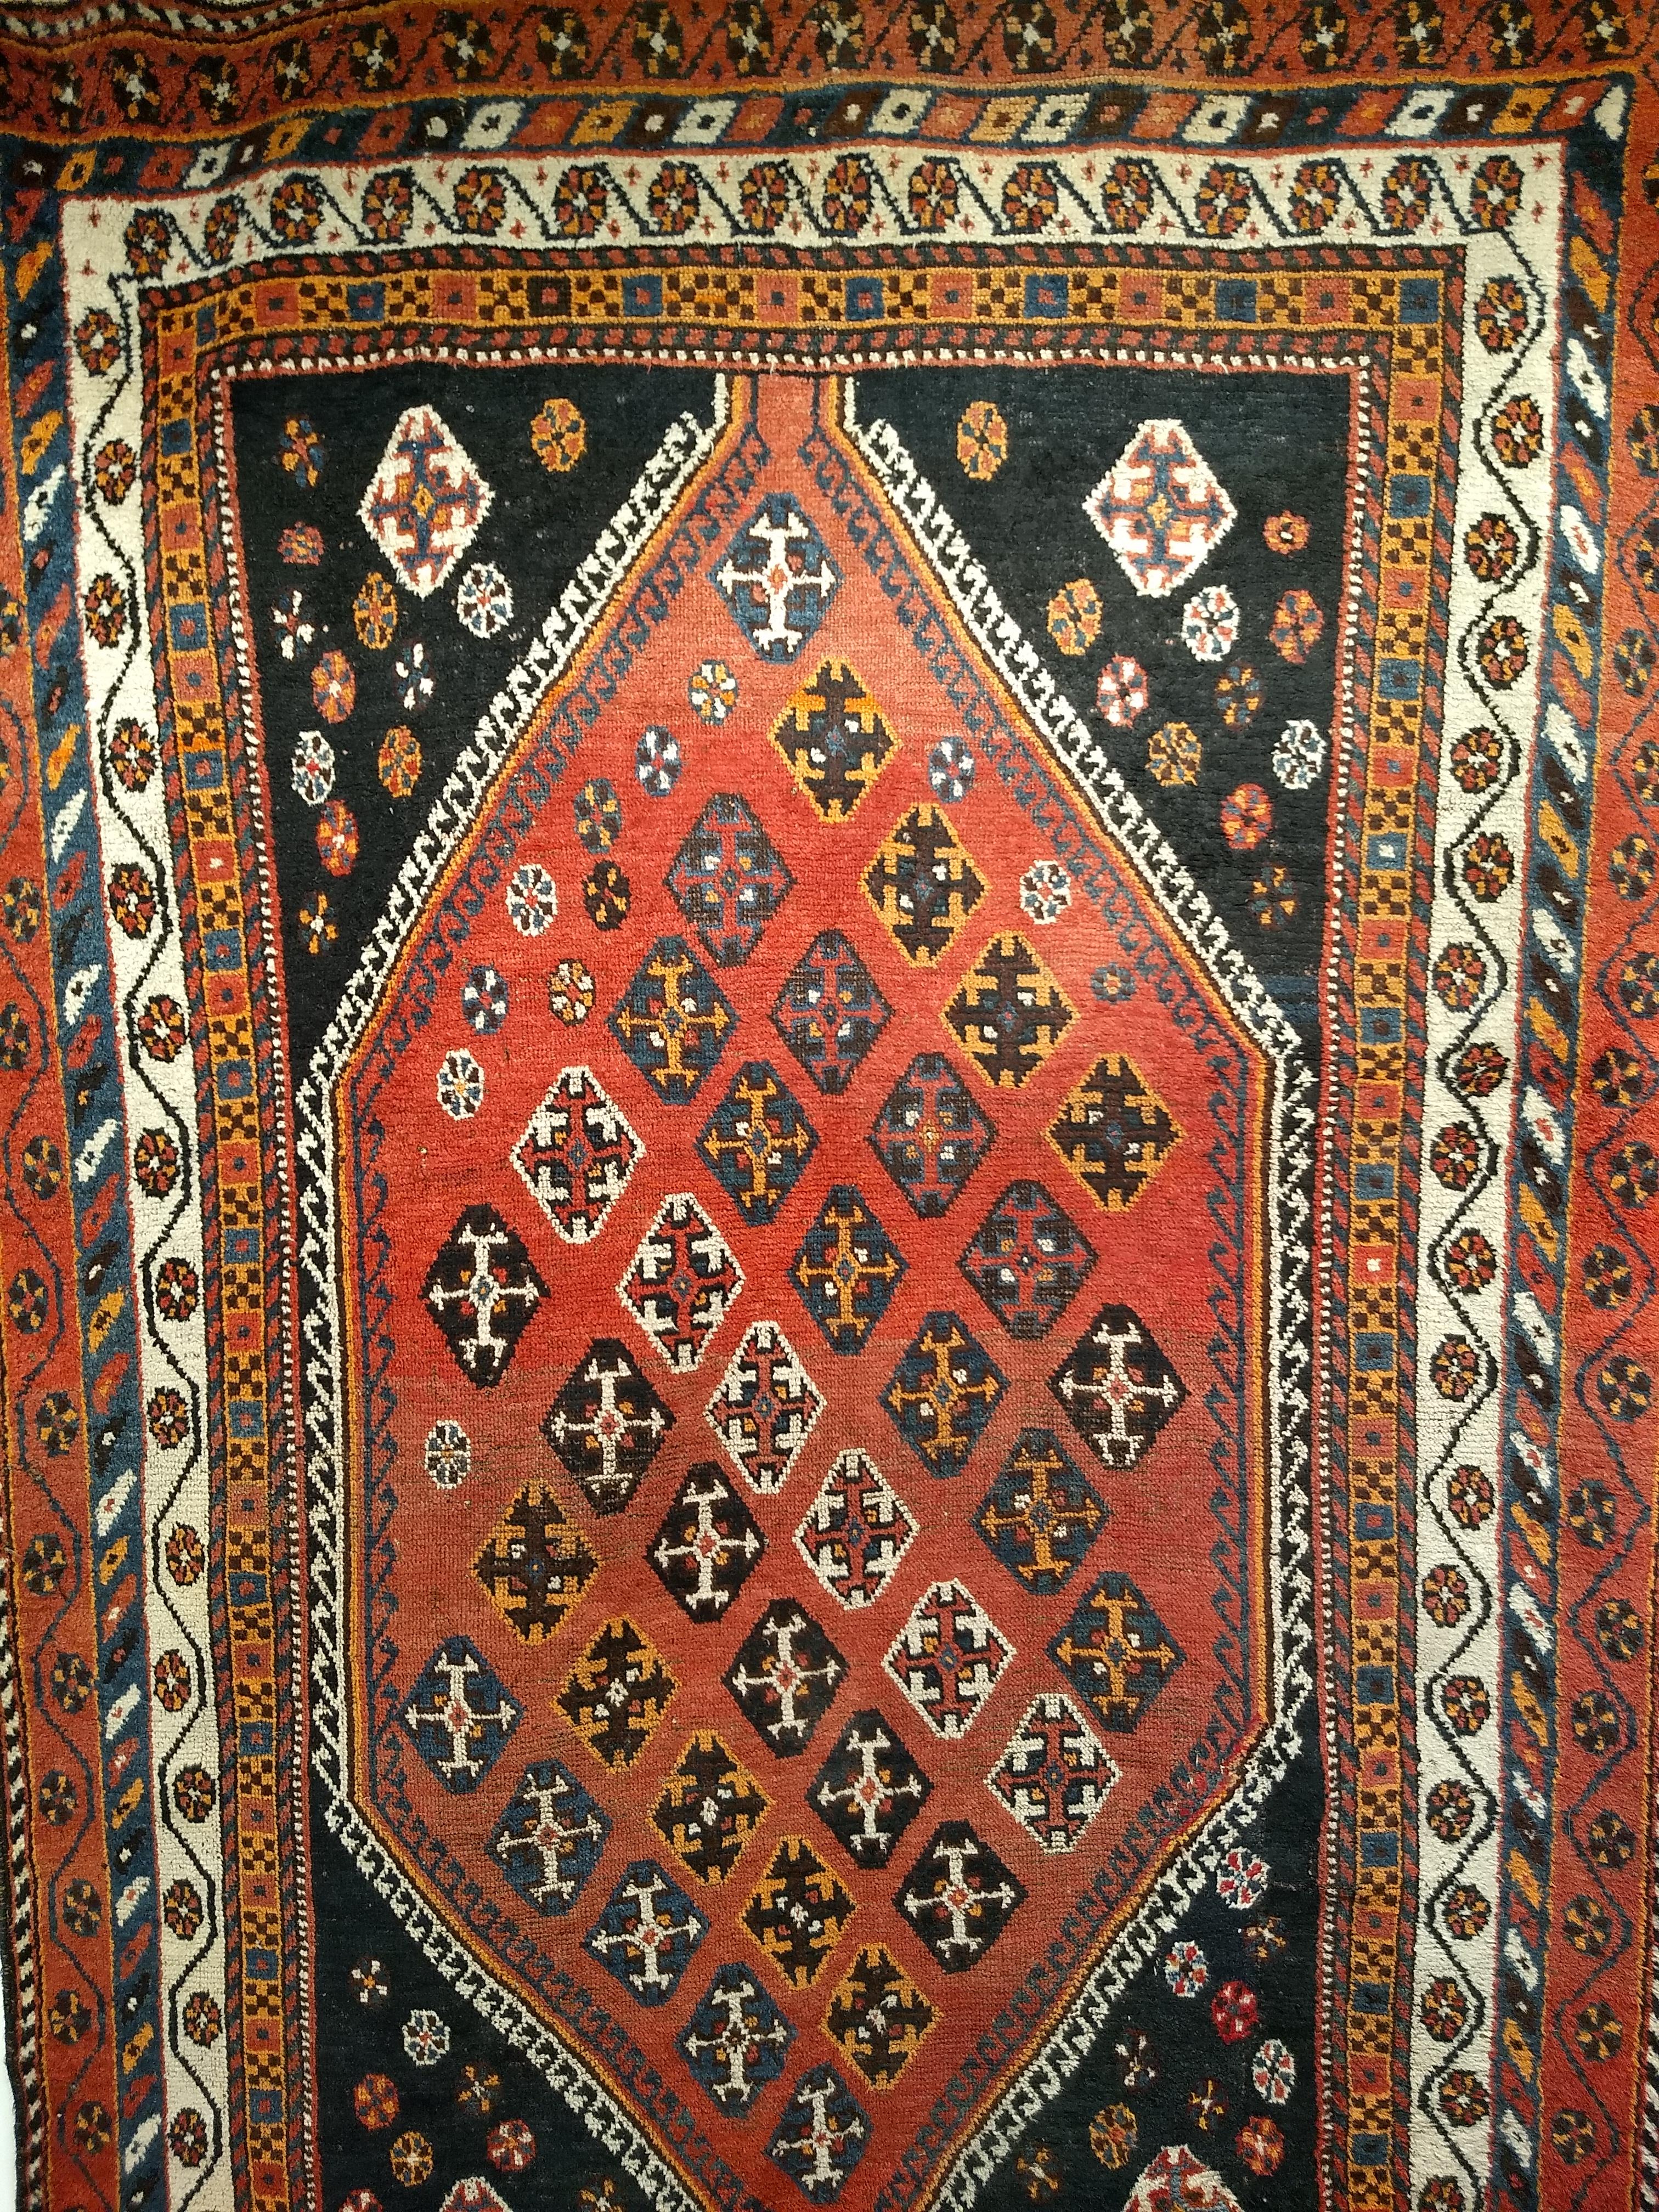 Vegetable Dyed Vintage Persian Qashqai Tribal Area Rug in Rust, Ivory, Blue, Yellow, Black For Sale